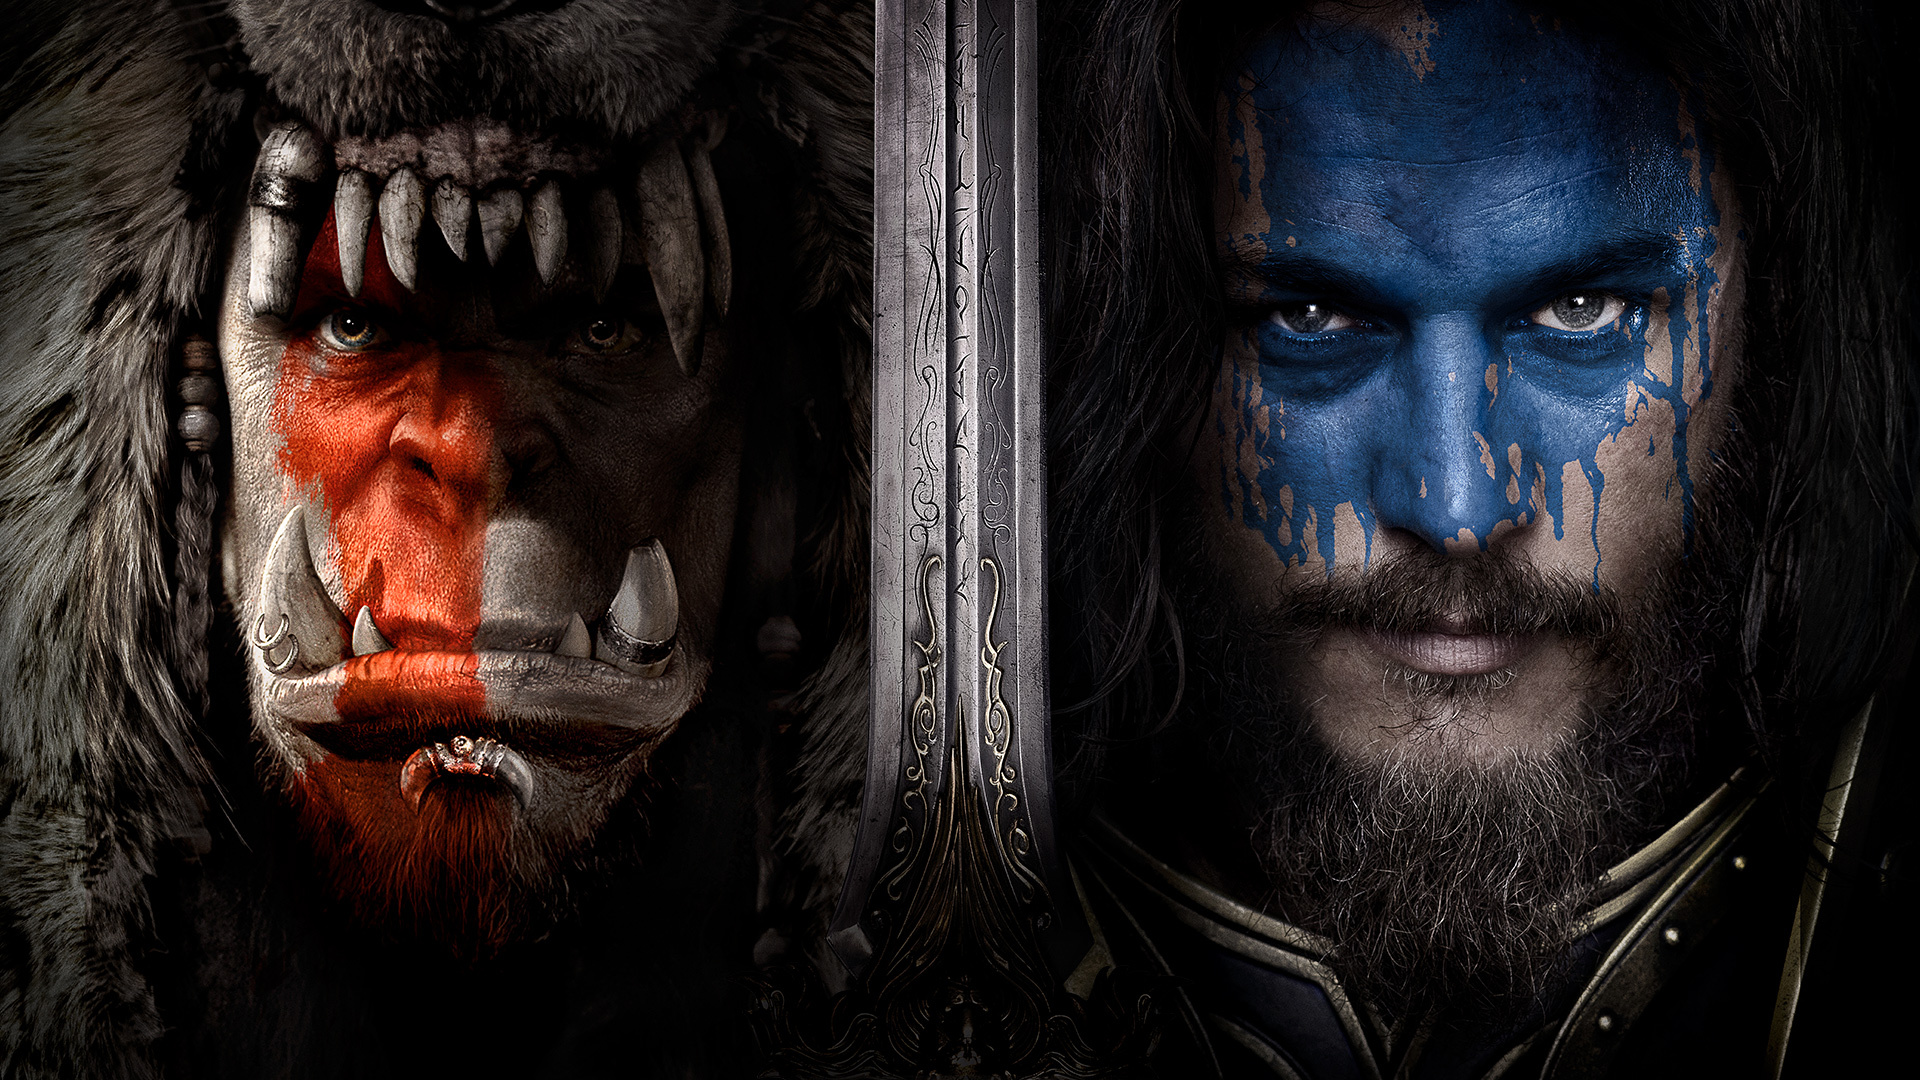 Warcraft Movie High Definition Wallpapers